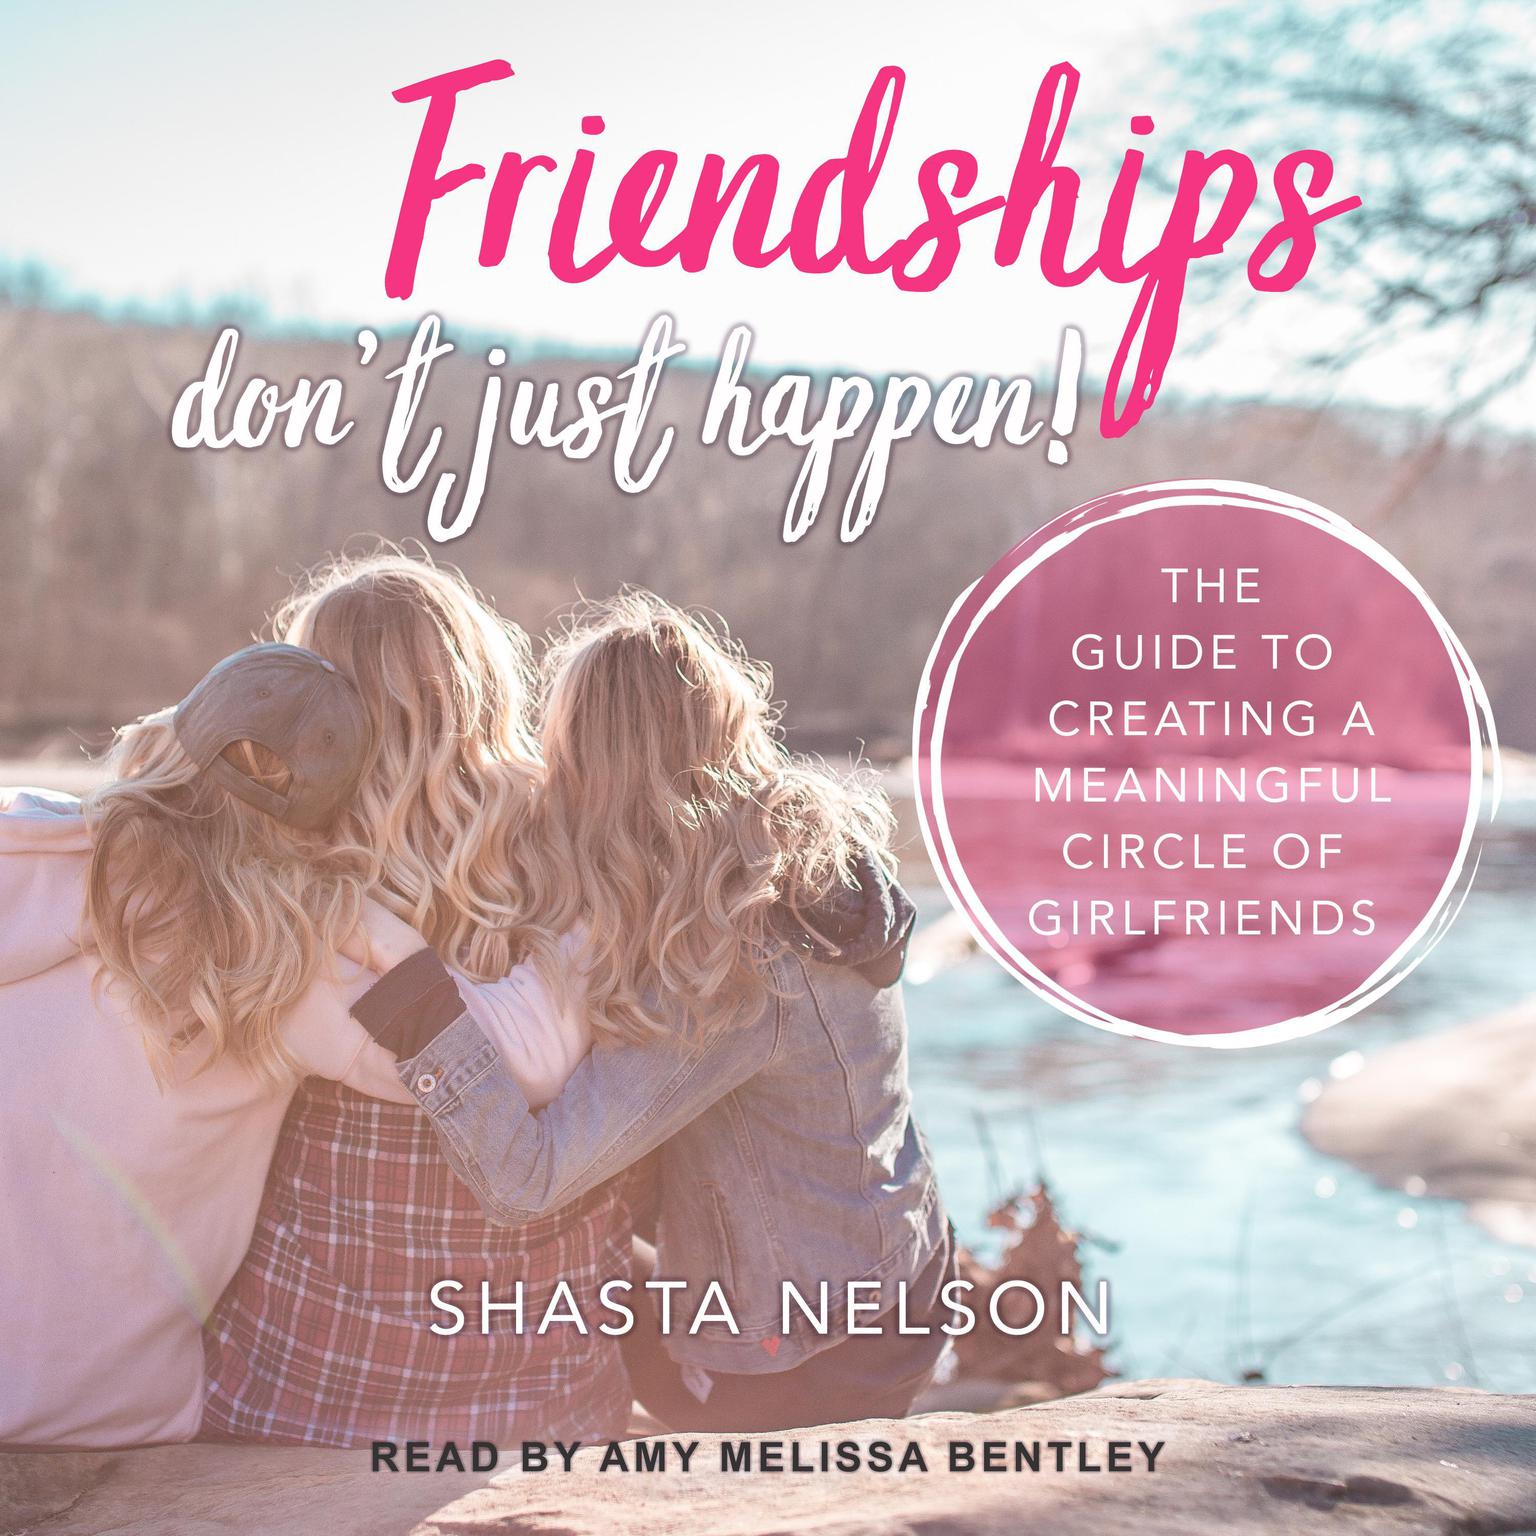 Friendships Dont Just Happen!: The Guide to Creating a Meaningful Circle of GirlFriends Audiobook, by Shasta Nelson